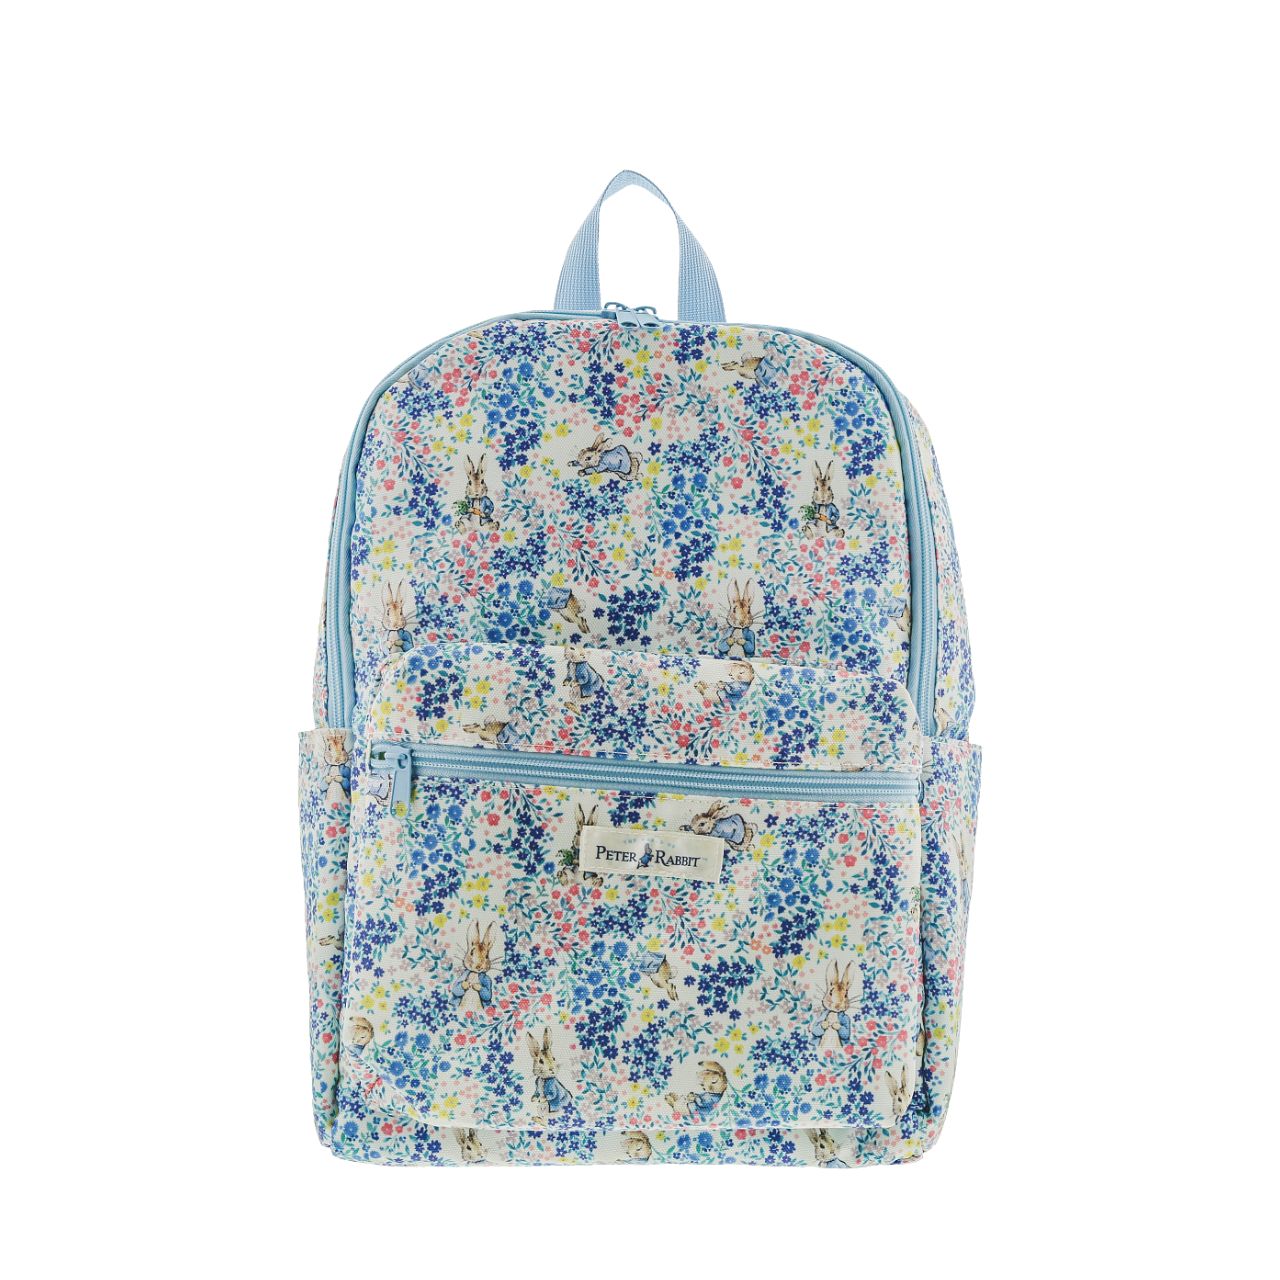 Beatrix Potter Peter Rabbit Garden Party Backpack  This classic adult backpack features a brand new design as part of our Peter Rabbit Garden Party Pop Up Collection. A large interior with an exterior zip pocket, side pockets and adjustable straps makes this the perfect accessory for those on the go. 